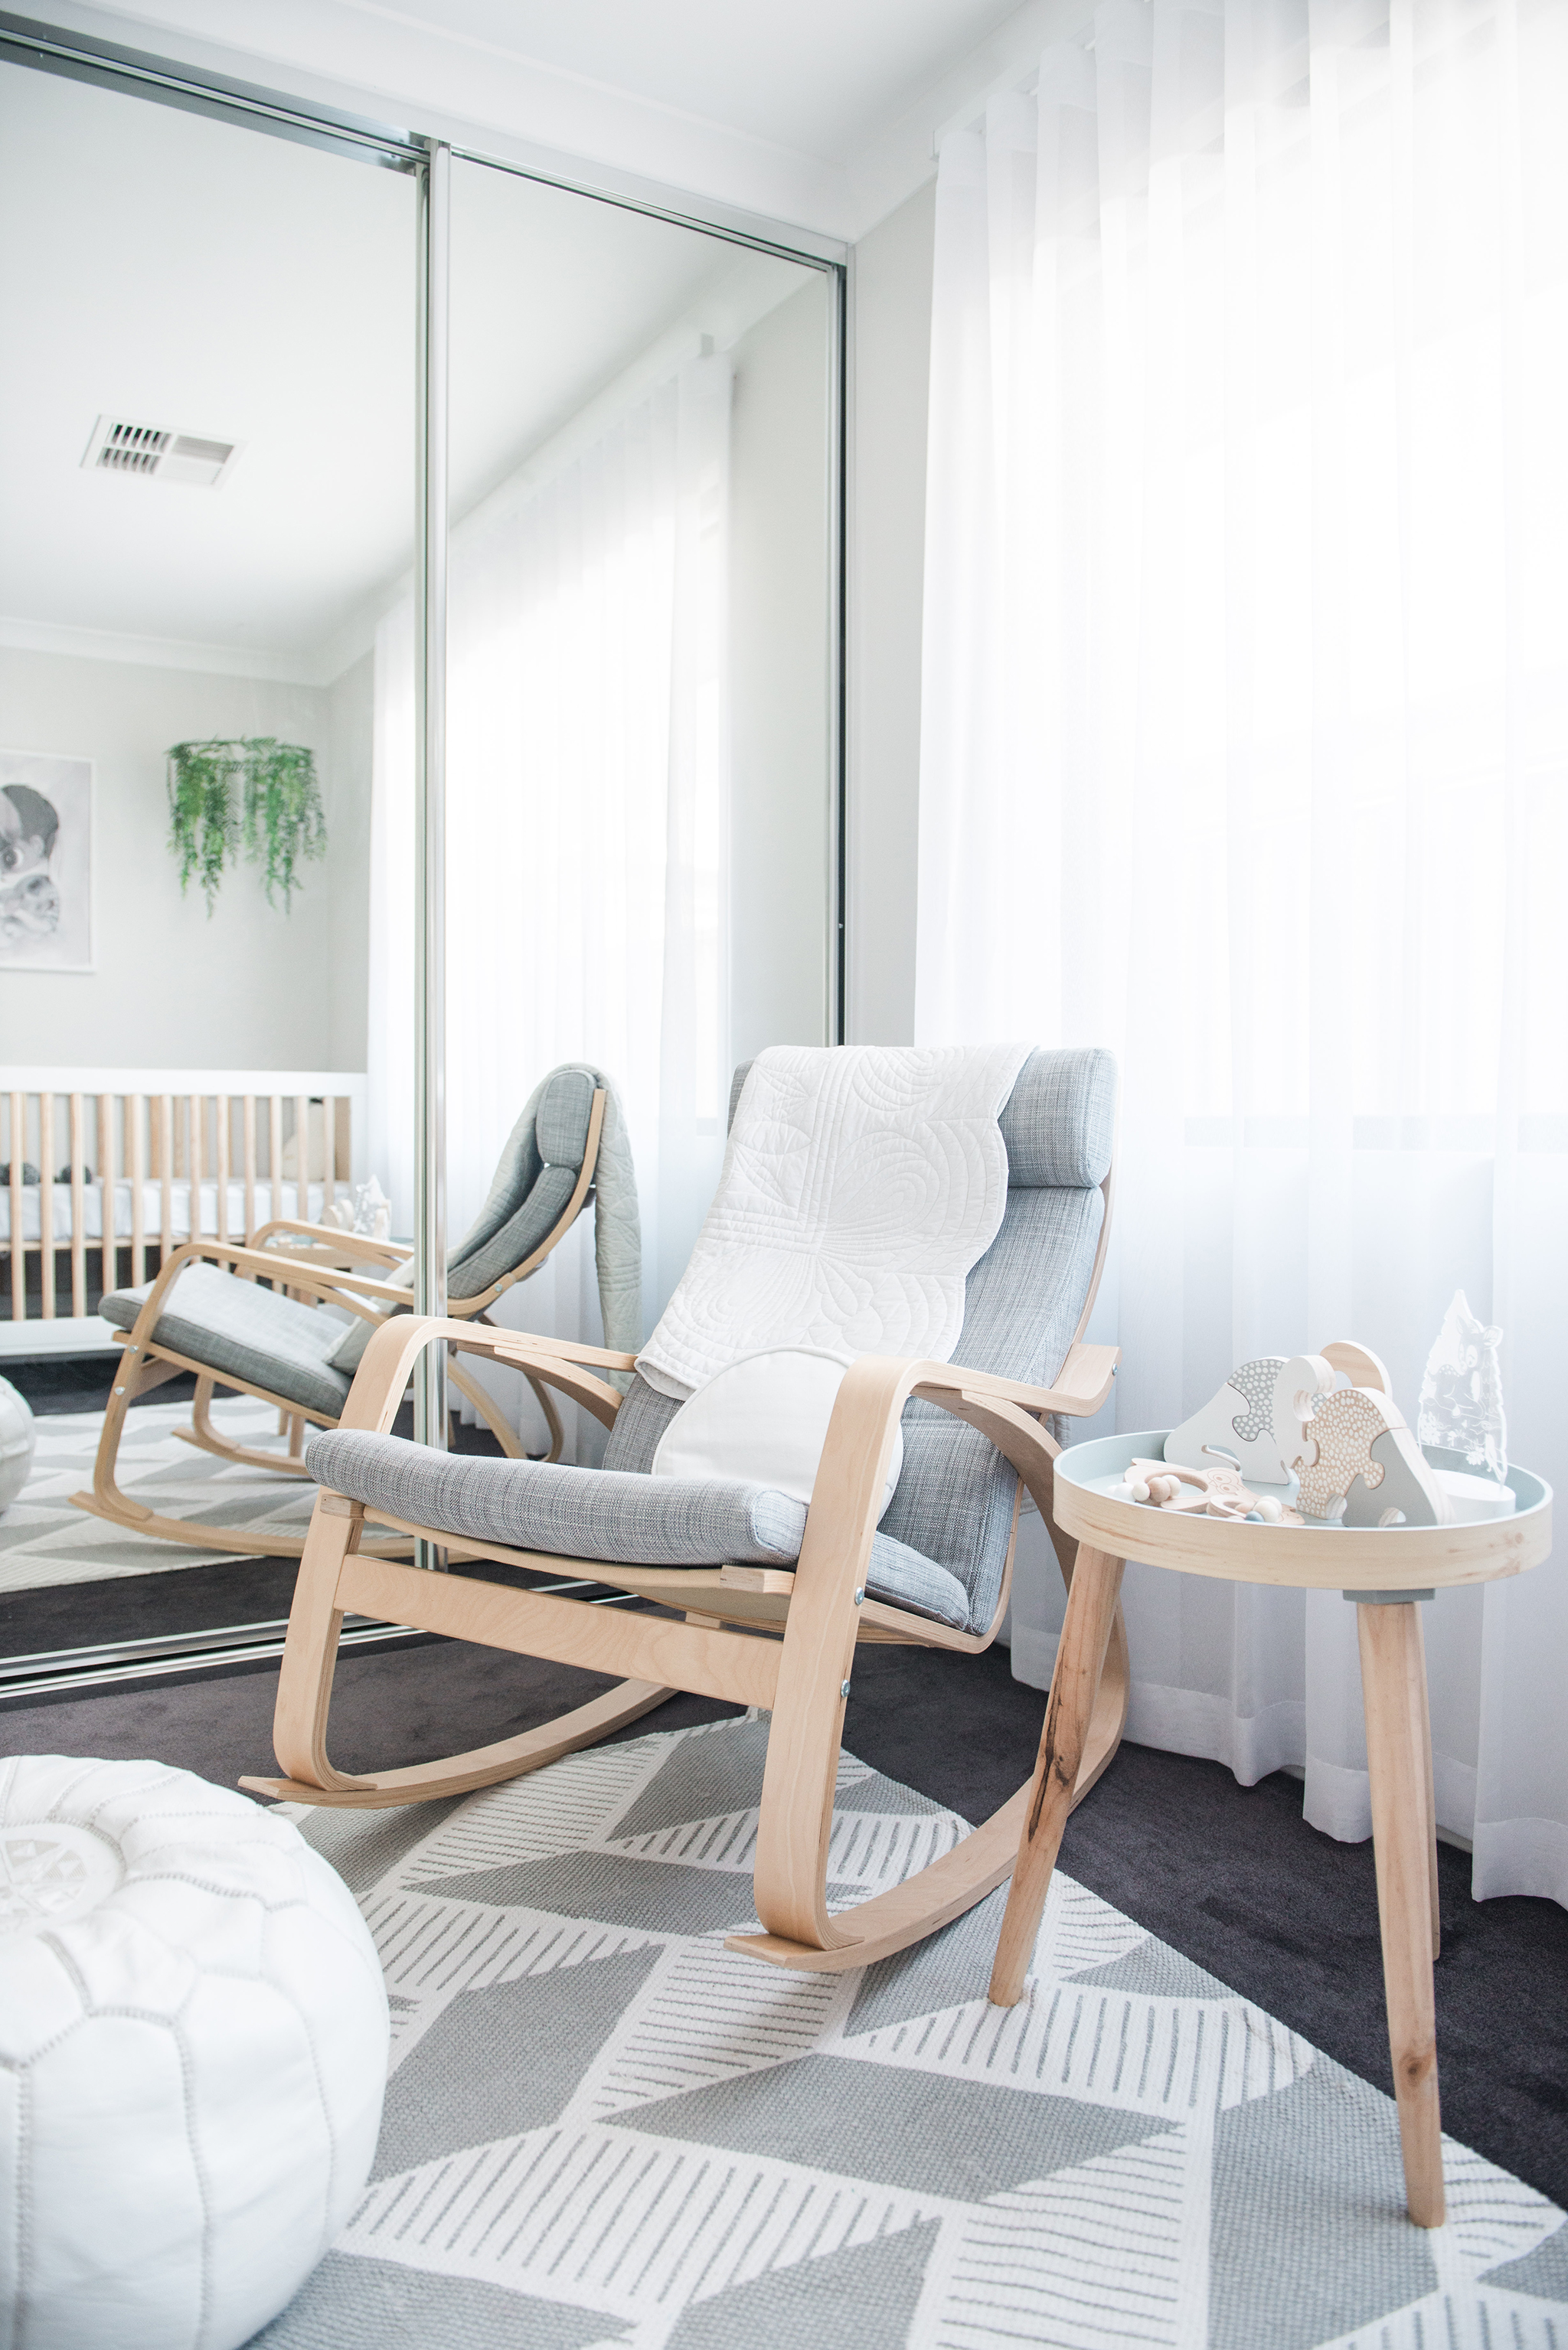 Ikea Rocker in White, Gray and Natural Wood Nursery - Project Nursery